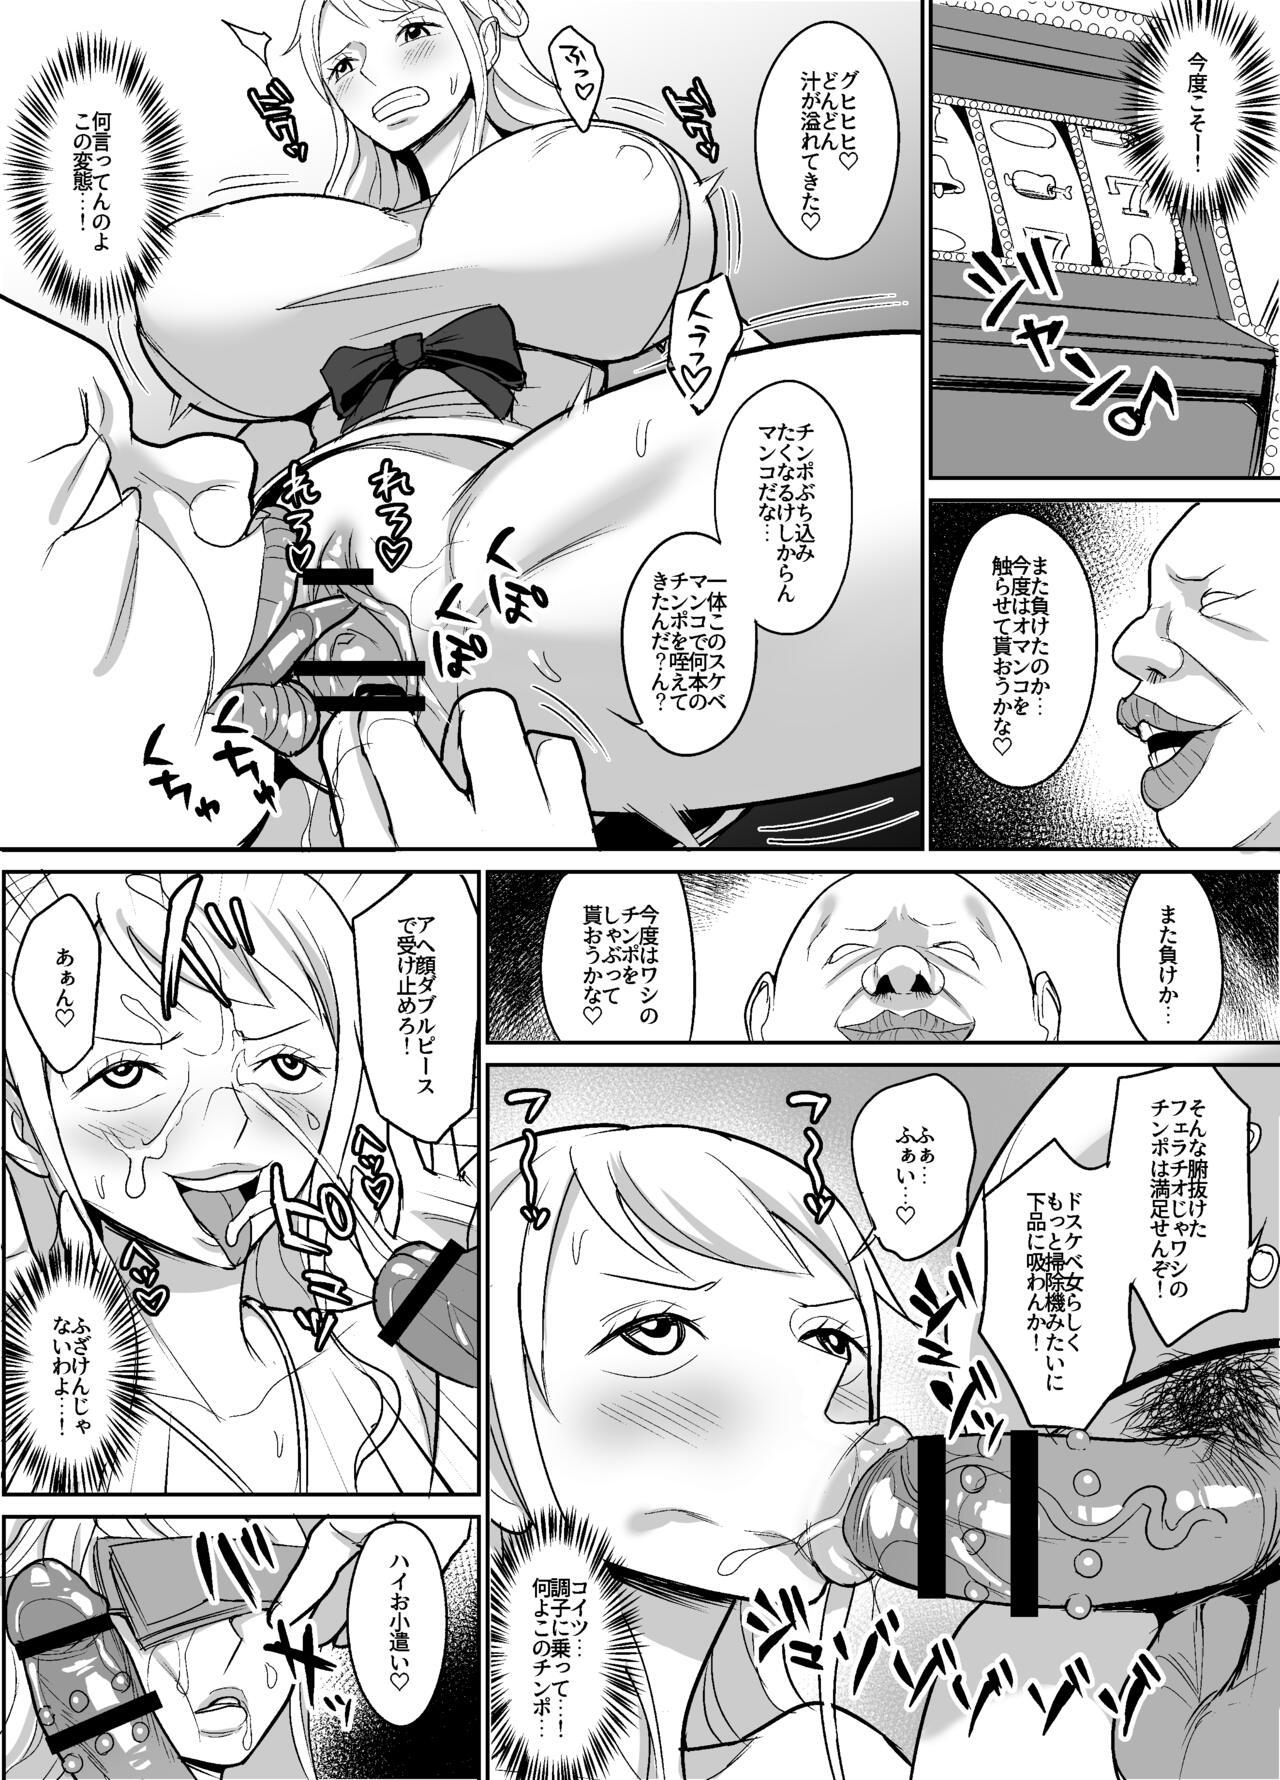 Rico Nami Ver. Gold - One piece Hot Brunette - Page 6